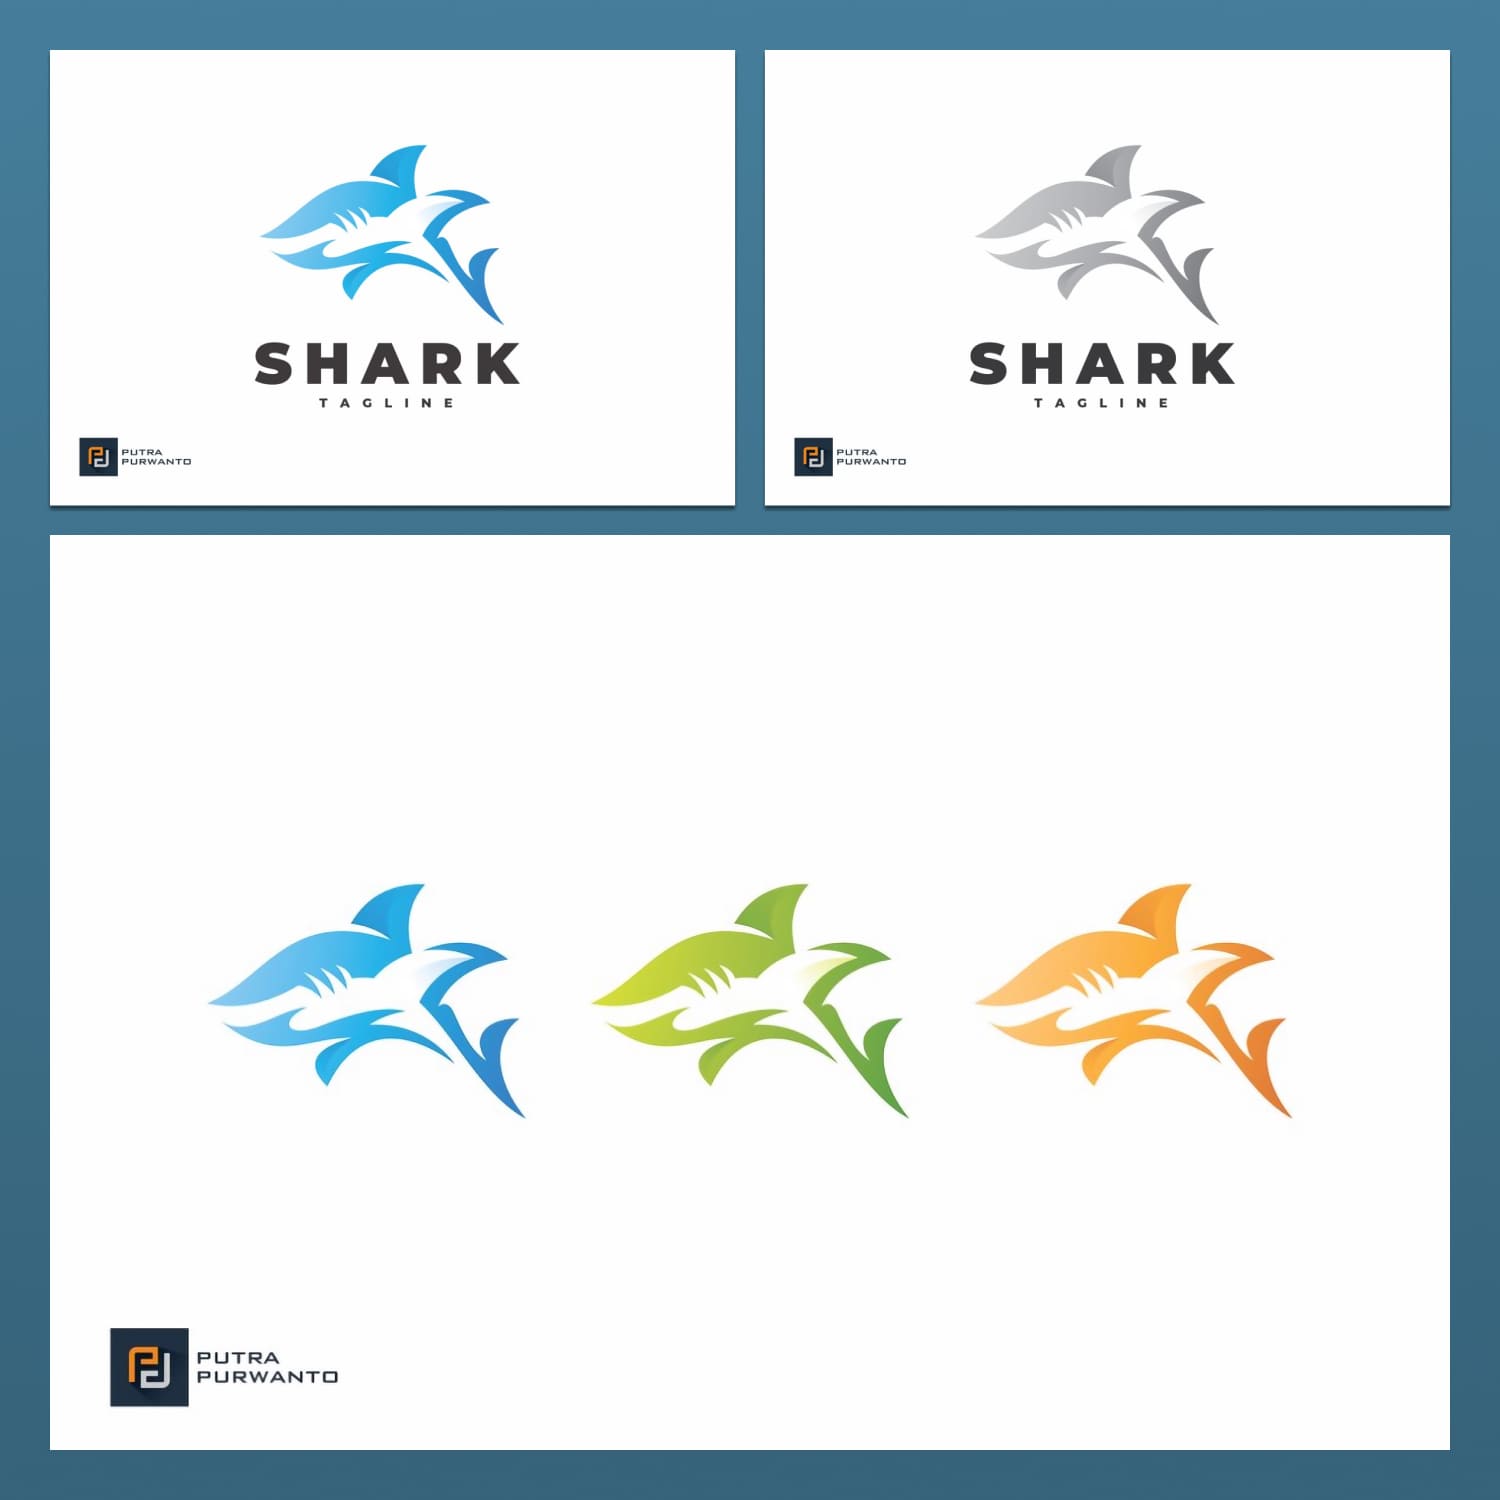 Shark - Logo Template created by putra_purwanto.